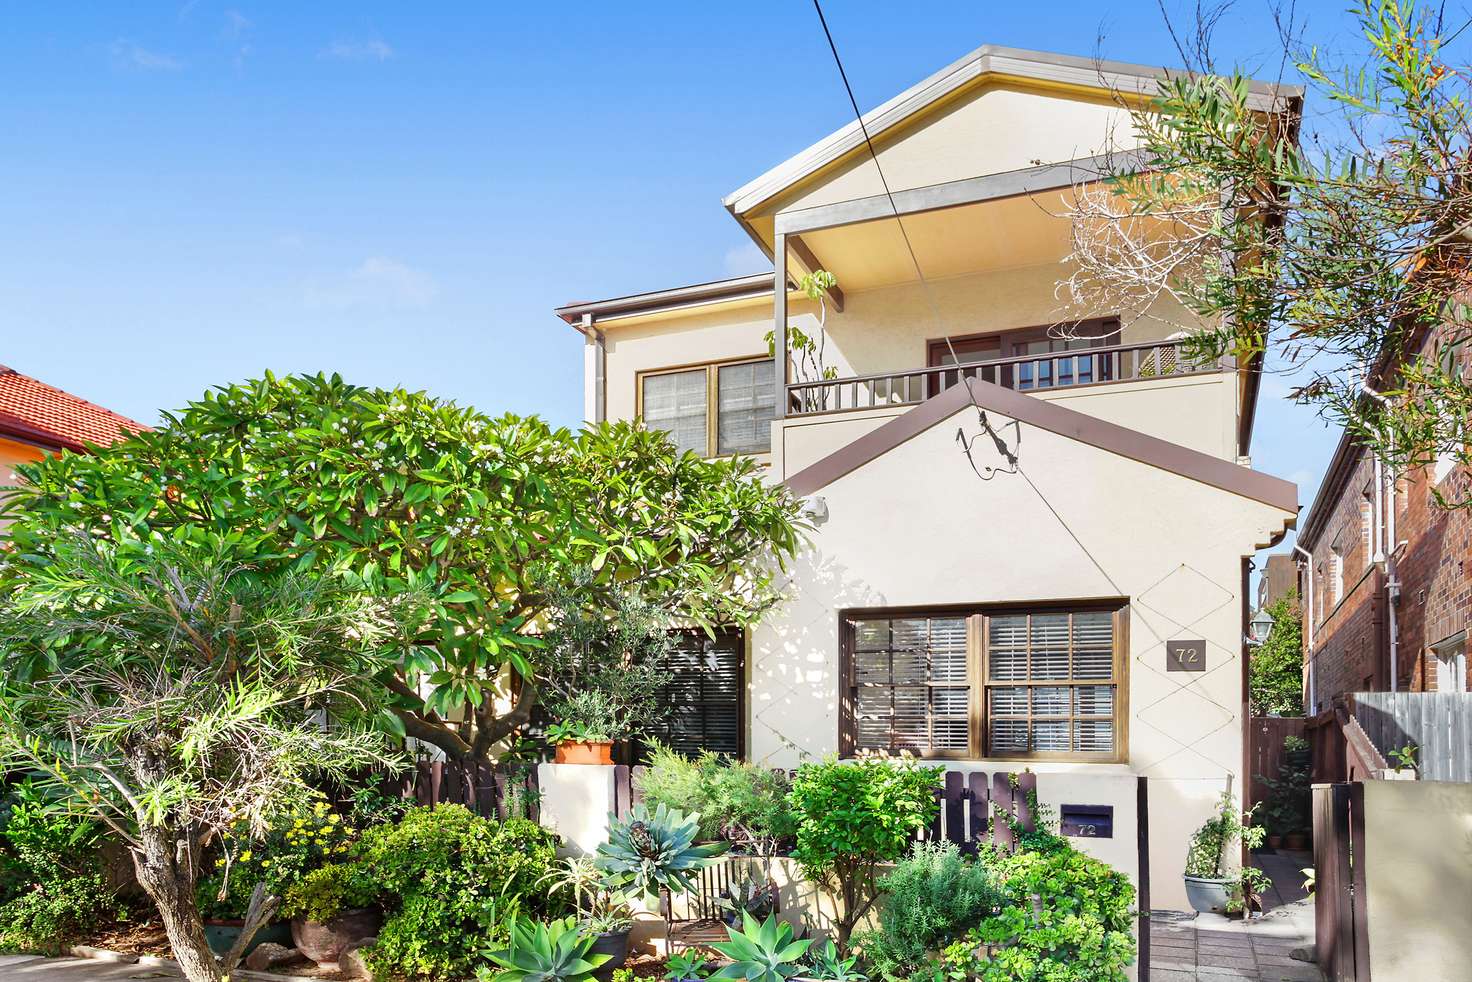 Main view of Homely house listing, 72 O'Donnell Street, North Bondi NSW 2026